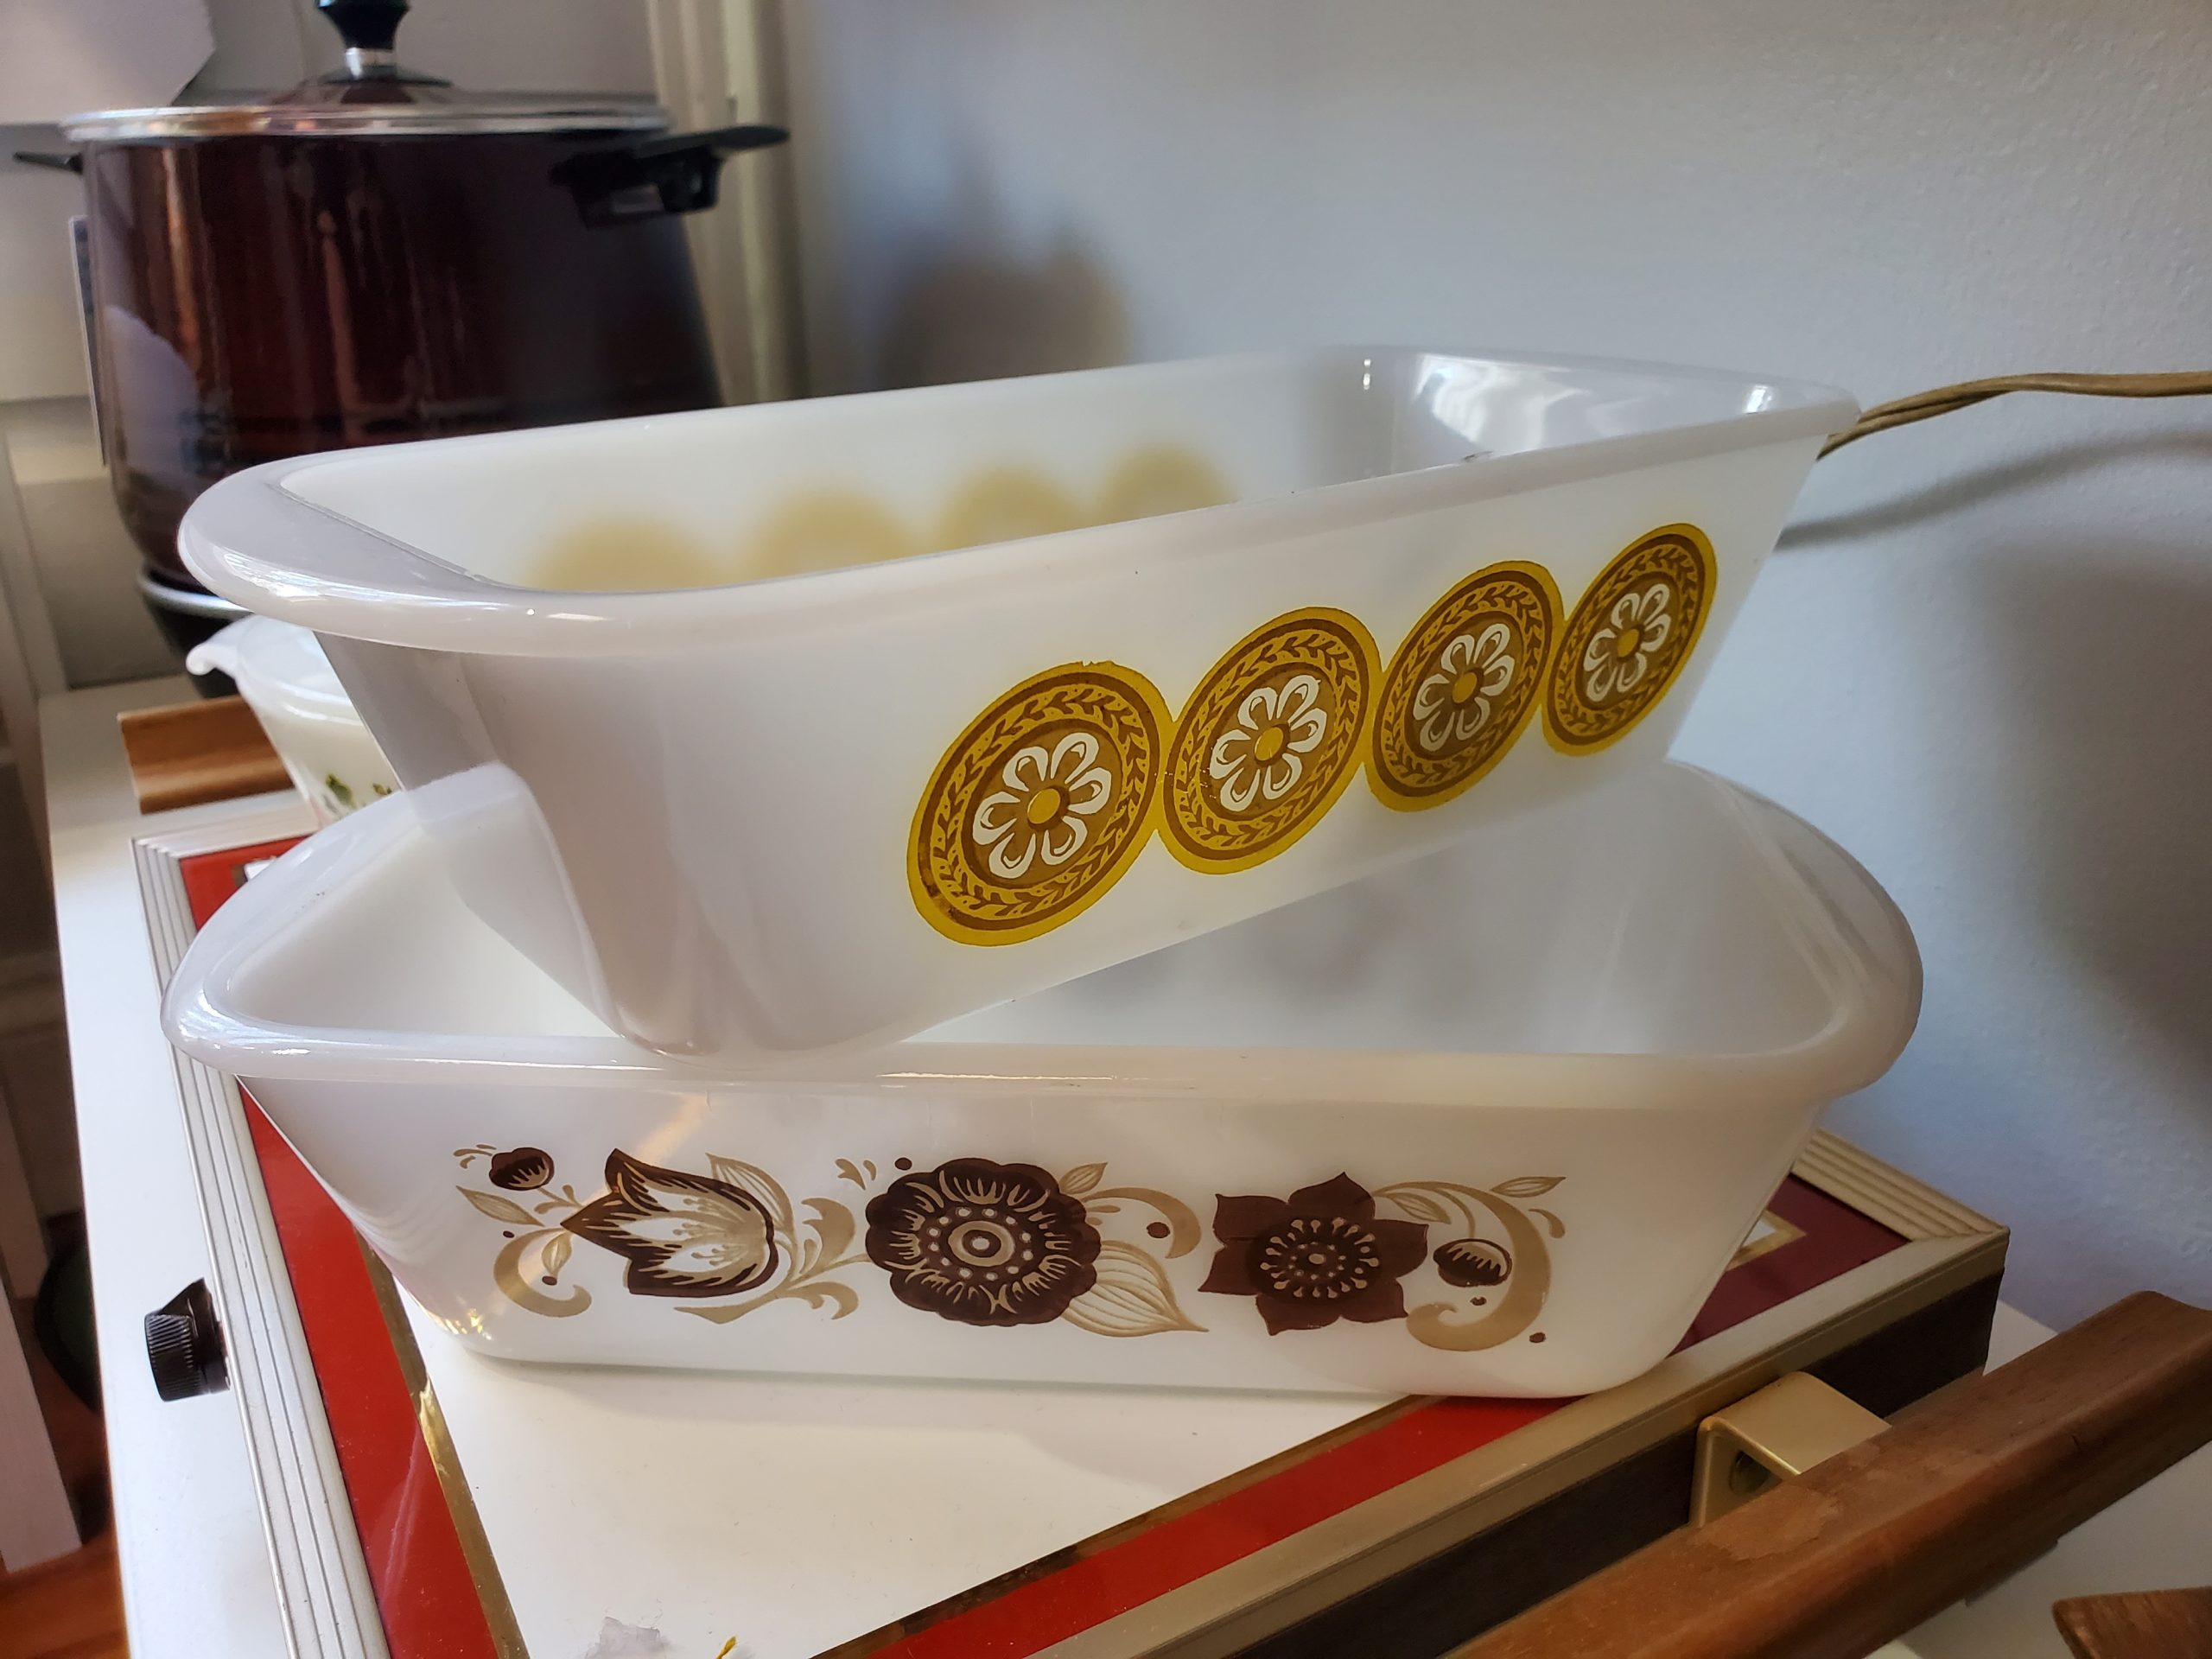 intage Dishes